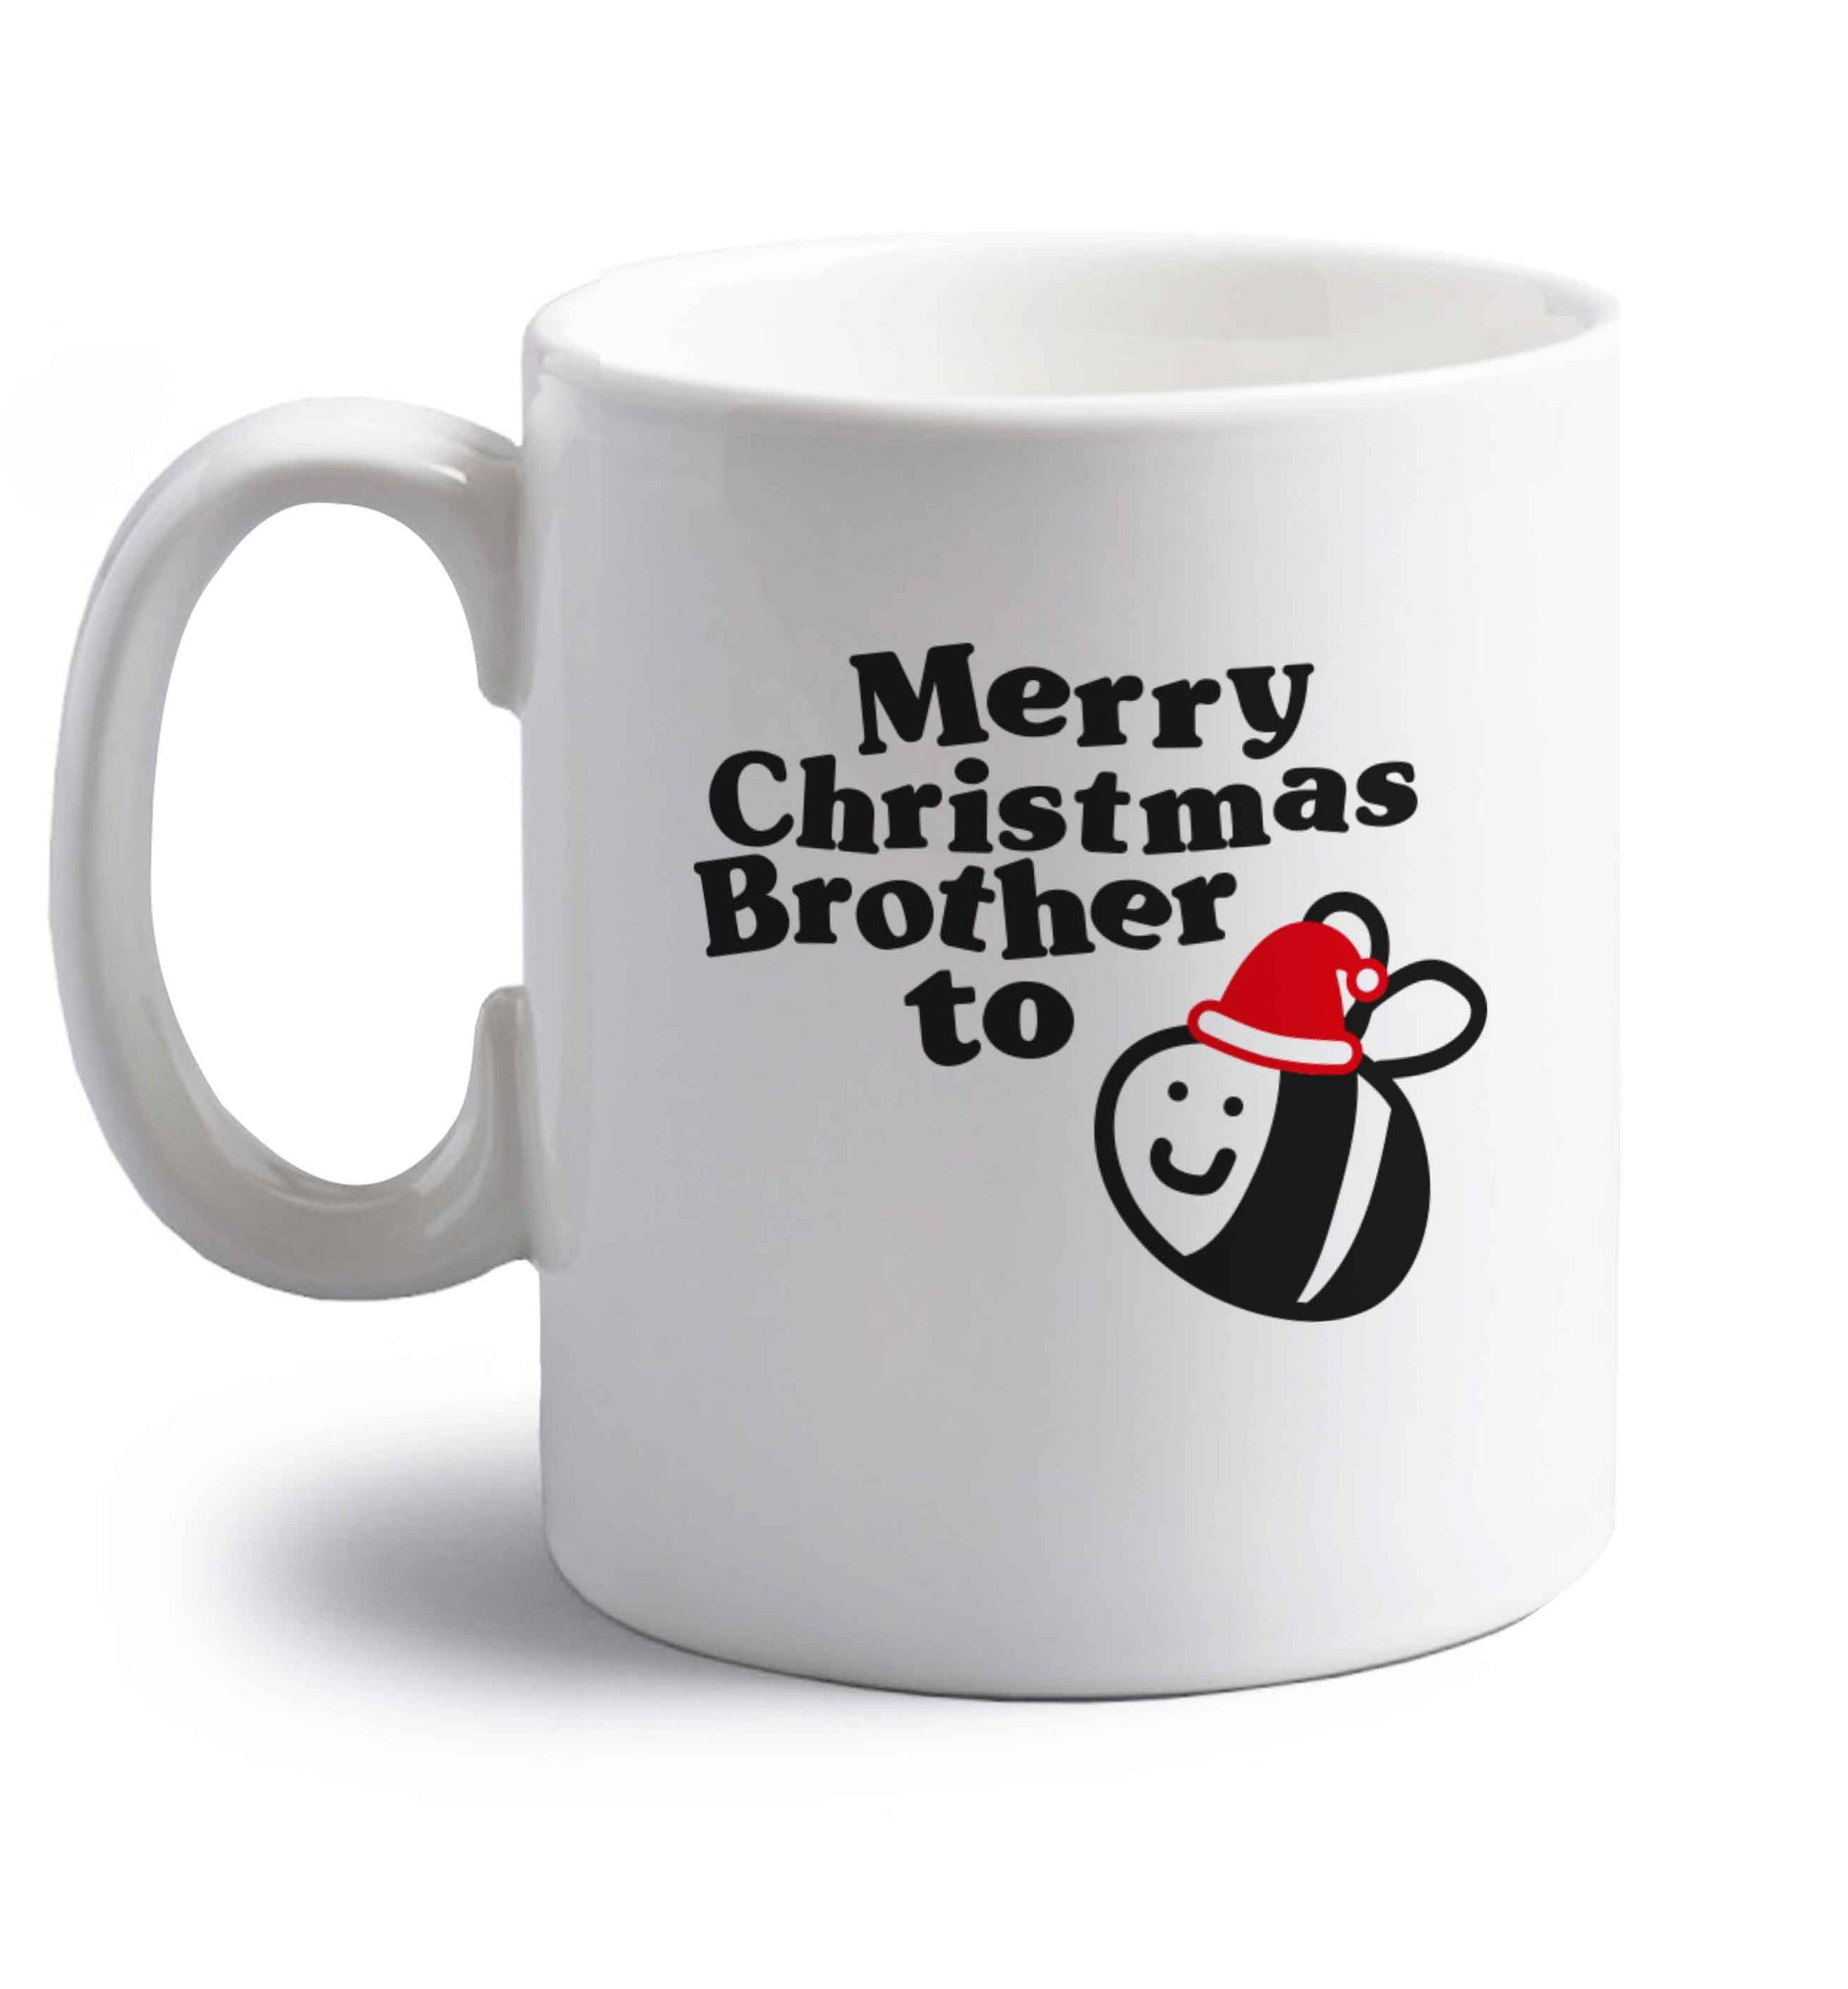 Merry Christmas brother to be right handed white ceramic mug 